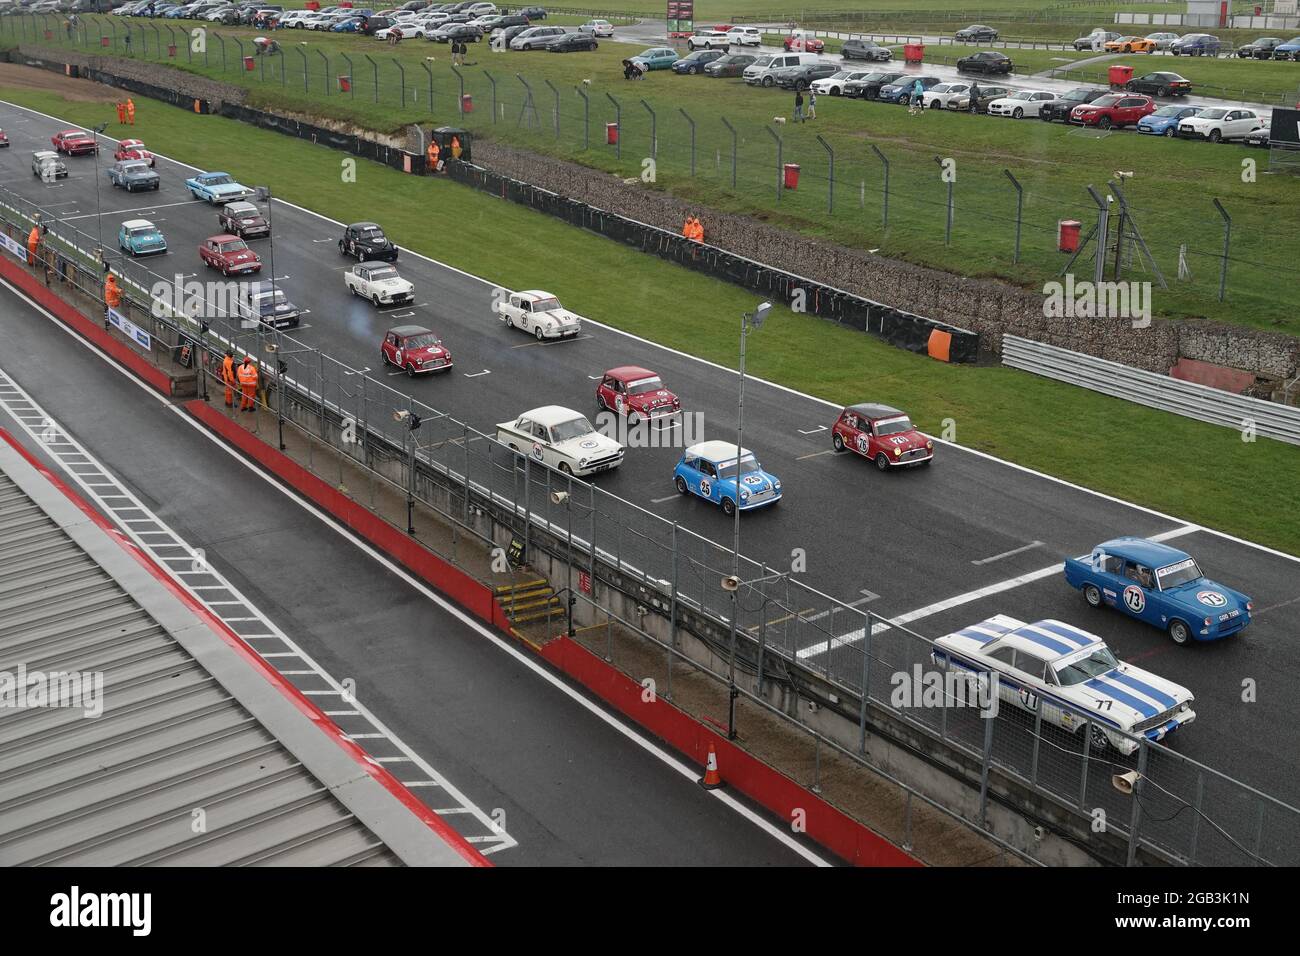 Brands Hatch, Kent, UK. 1st Aug, 2021. Classic, old and veteran historic saloon cars Competing in the BARC races at Brands Hatch in the changeable weather. Credit: Motofoto/Alamy Live News Stock Photo